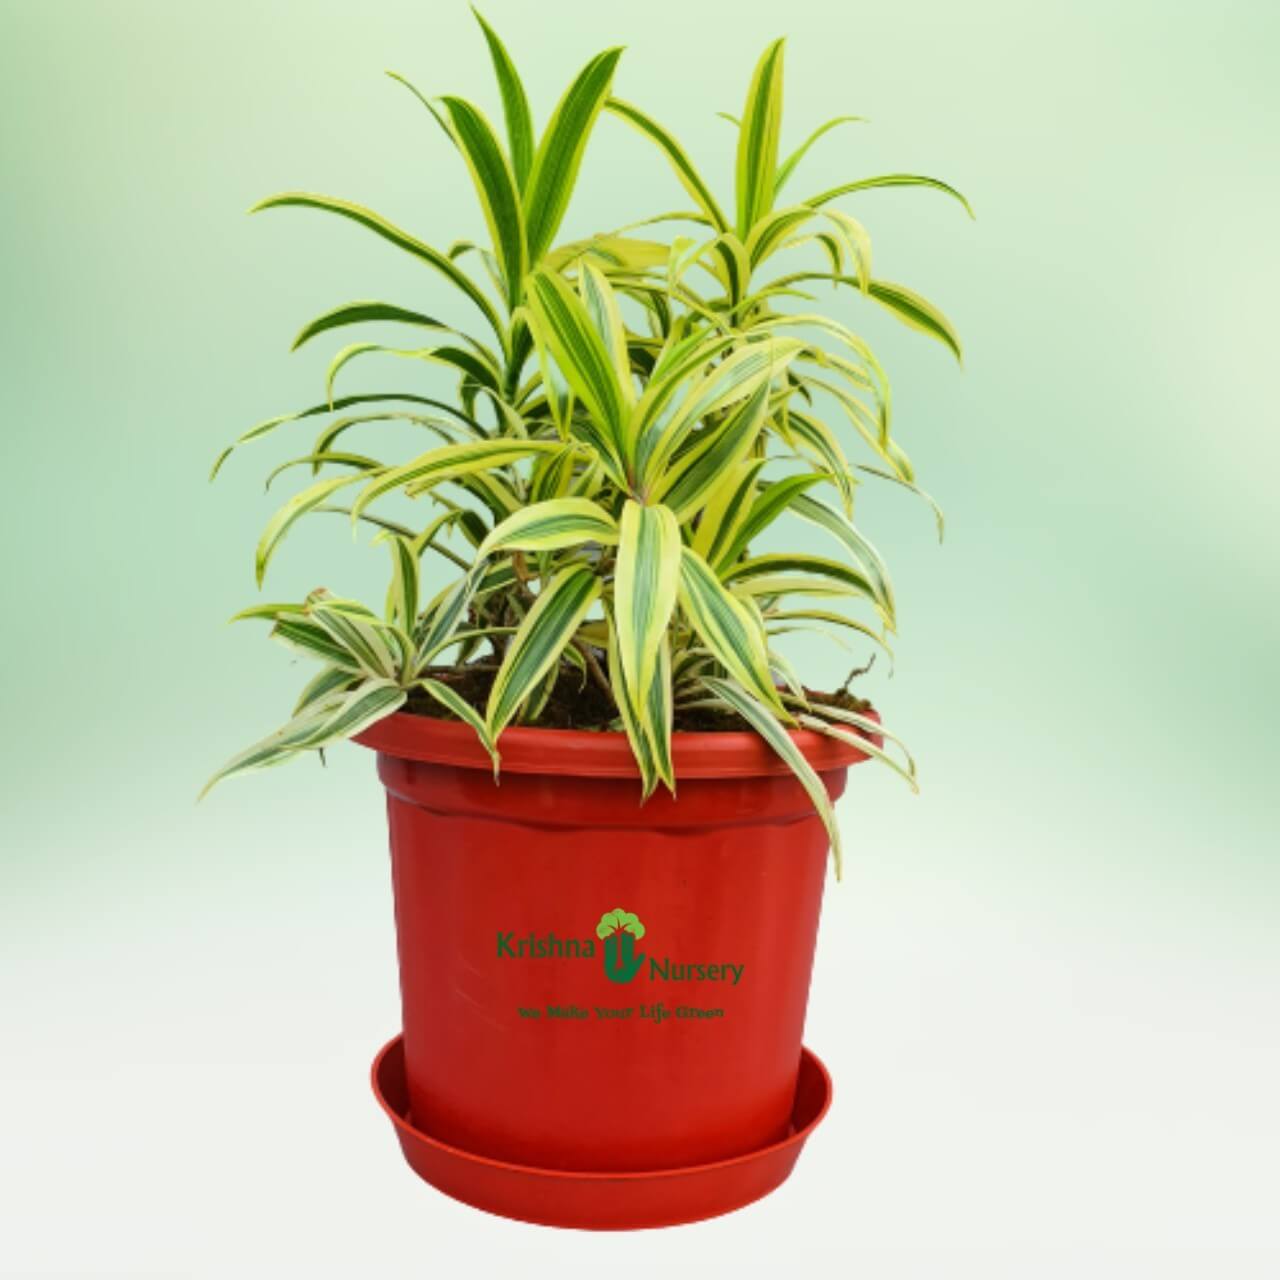 Song of India Golden - 10 Inch - Red Pot